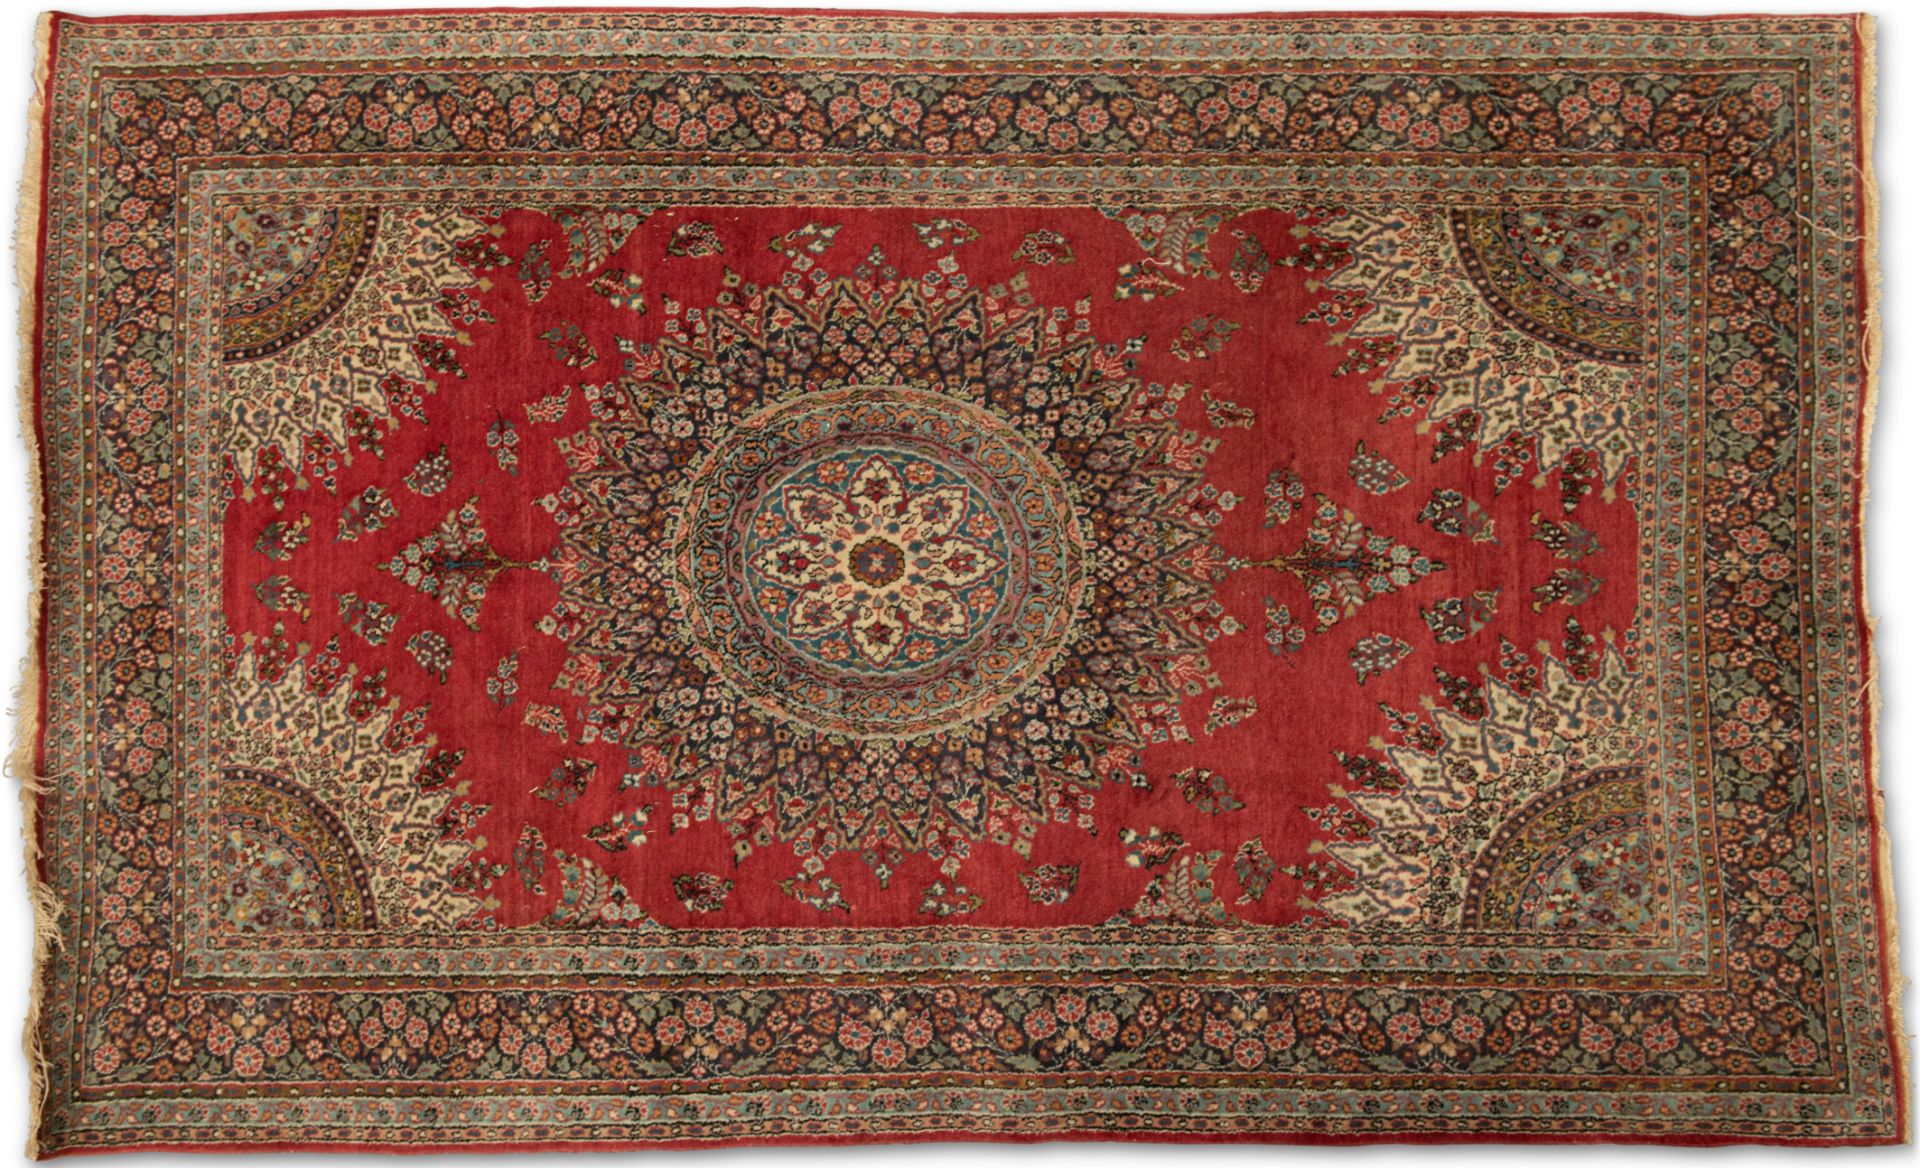 A PERSIAN RUG, hand-knotted, the deep red field with a highly decorative cream and blue circular